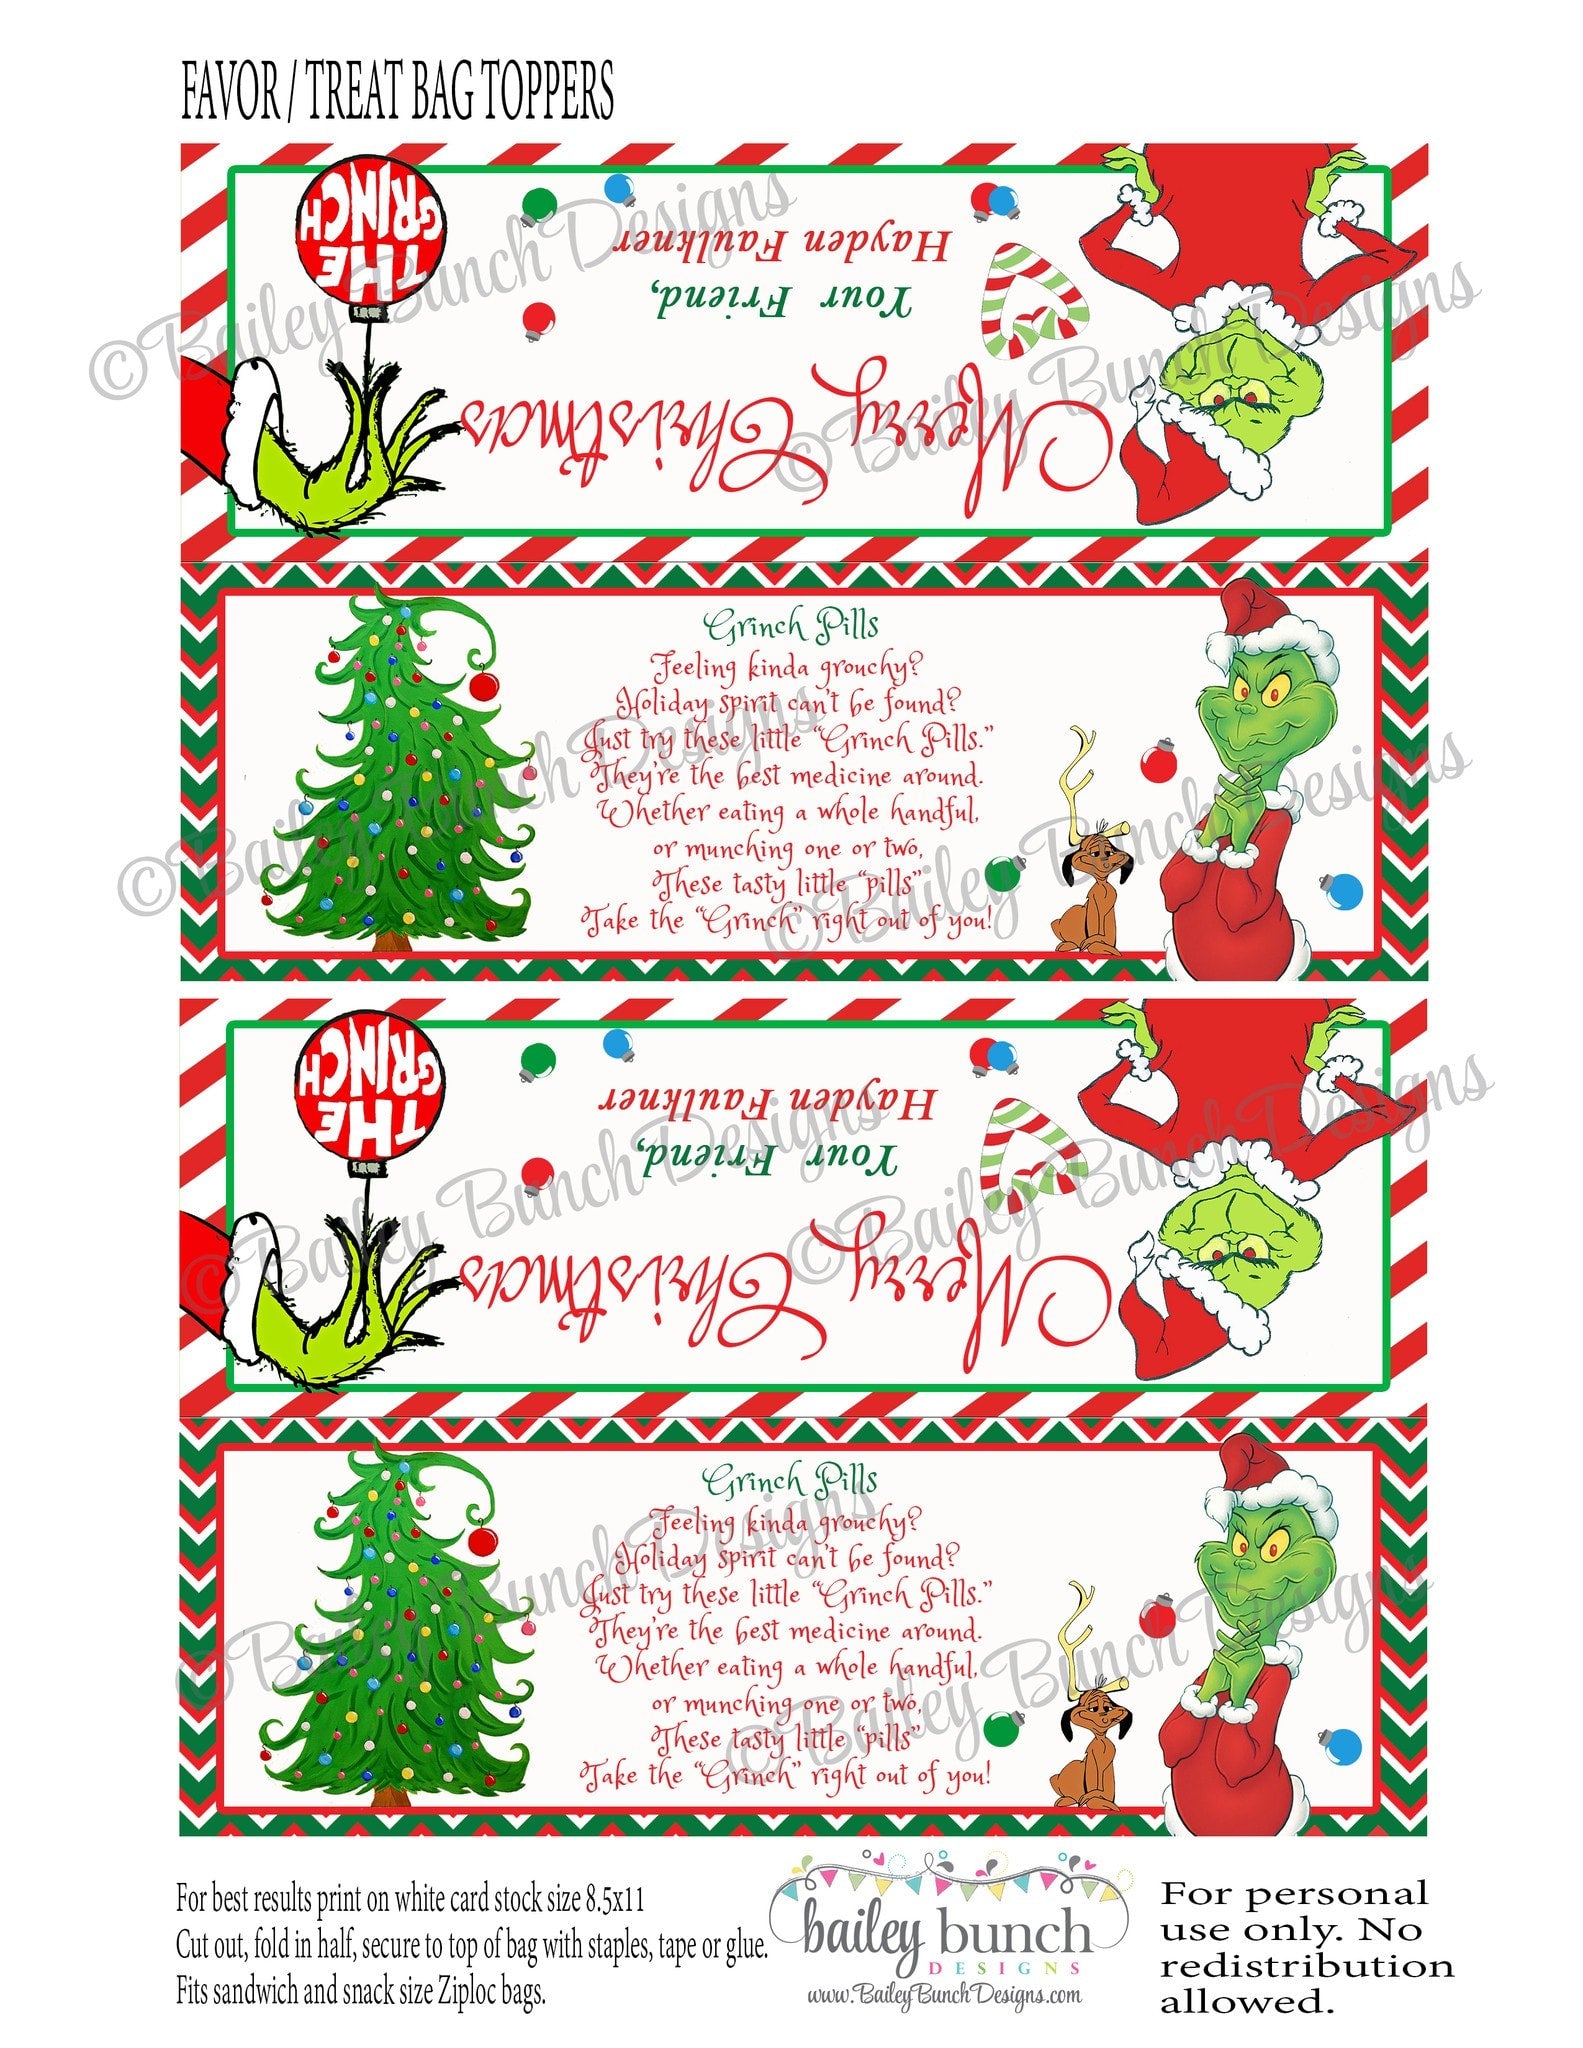 Grinch Pills Treat Bags, Christmas Toppers GRINCH0520 – Bailey Bunch Designs